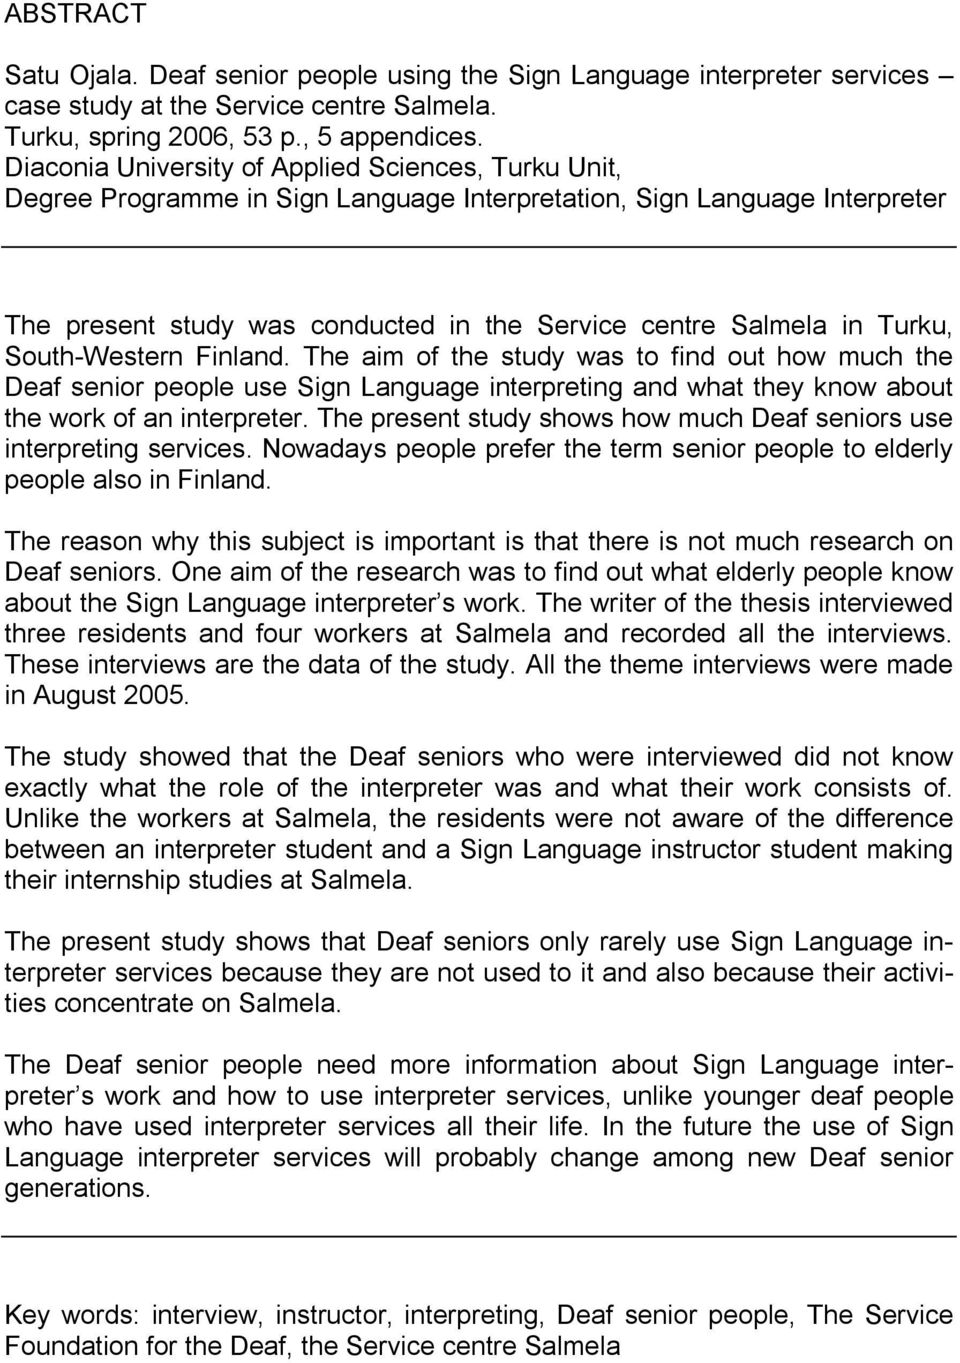 Turku, South-Western Finland. The aim of the study was to find out how much the Deaf senior people use Sign Language interpreting and what they know about the work of an interpreter.